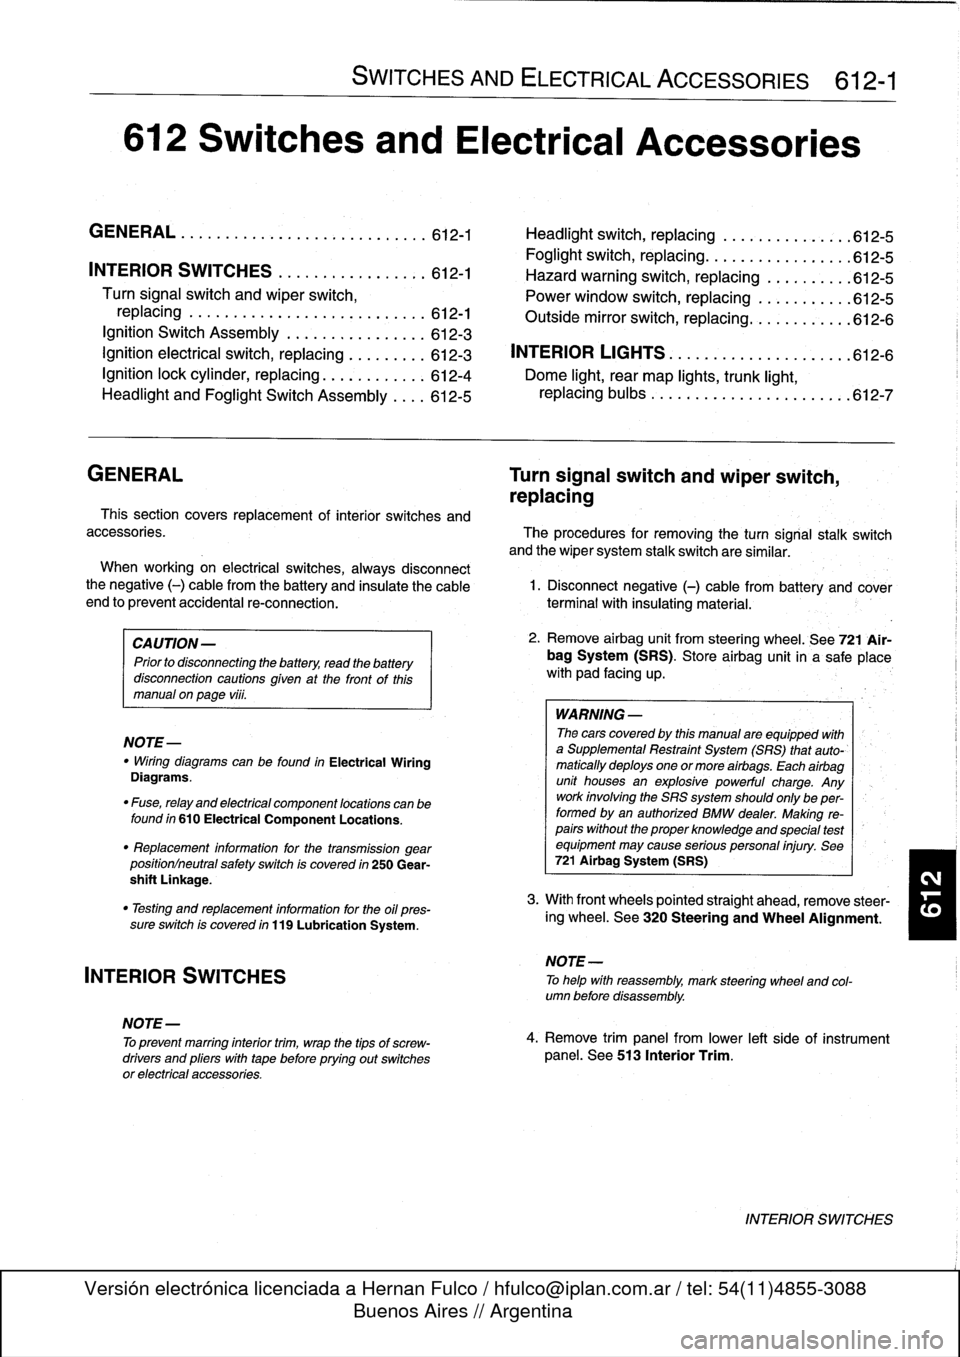 BMW 318i 1996 E36 Workshop Manual 
612
Switches
and
Electrical
Accessories

GENERAL
.
.
.
.
.
.
.
.
.
...
.
.
.
.
.
...
.
......
.612-1

	

Headlight
switch,
replacing

	

..
.
...
.
.
.
.
.
.
.
.
.
612-5

Foglight
switch,
replacing
.